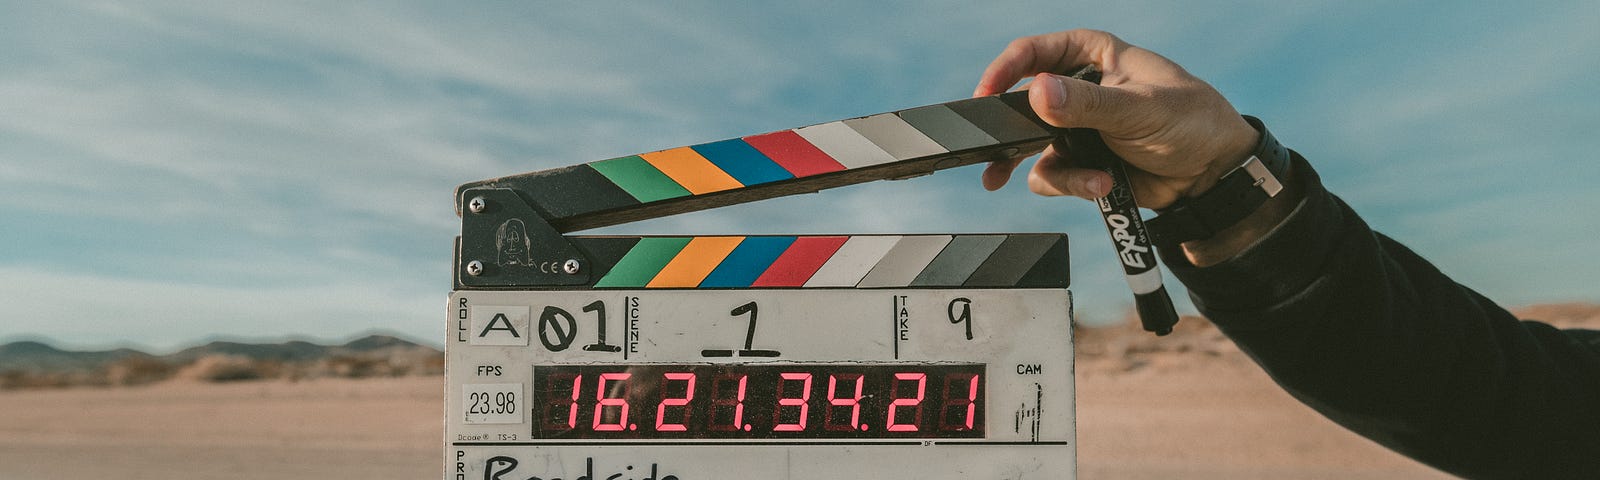 Clapper used on a movie set